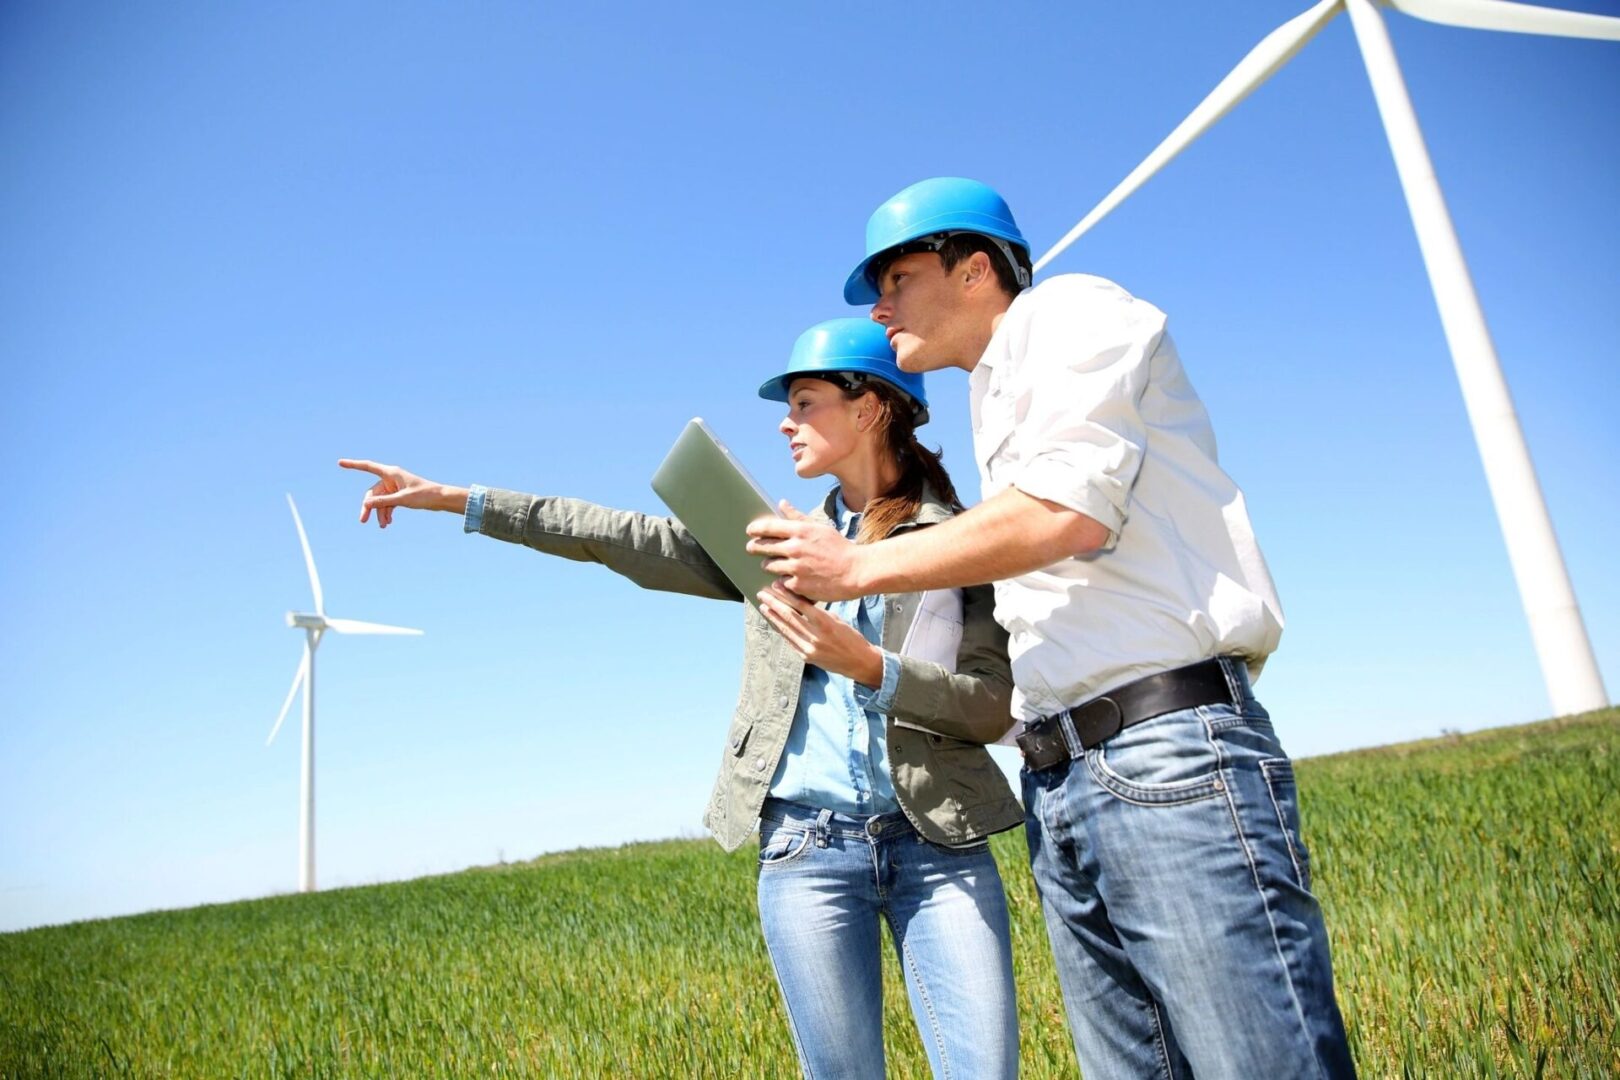 Two people standing in a field with wind turbines behind them.